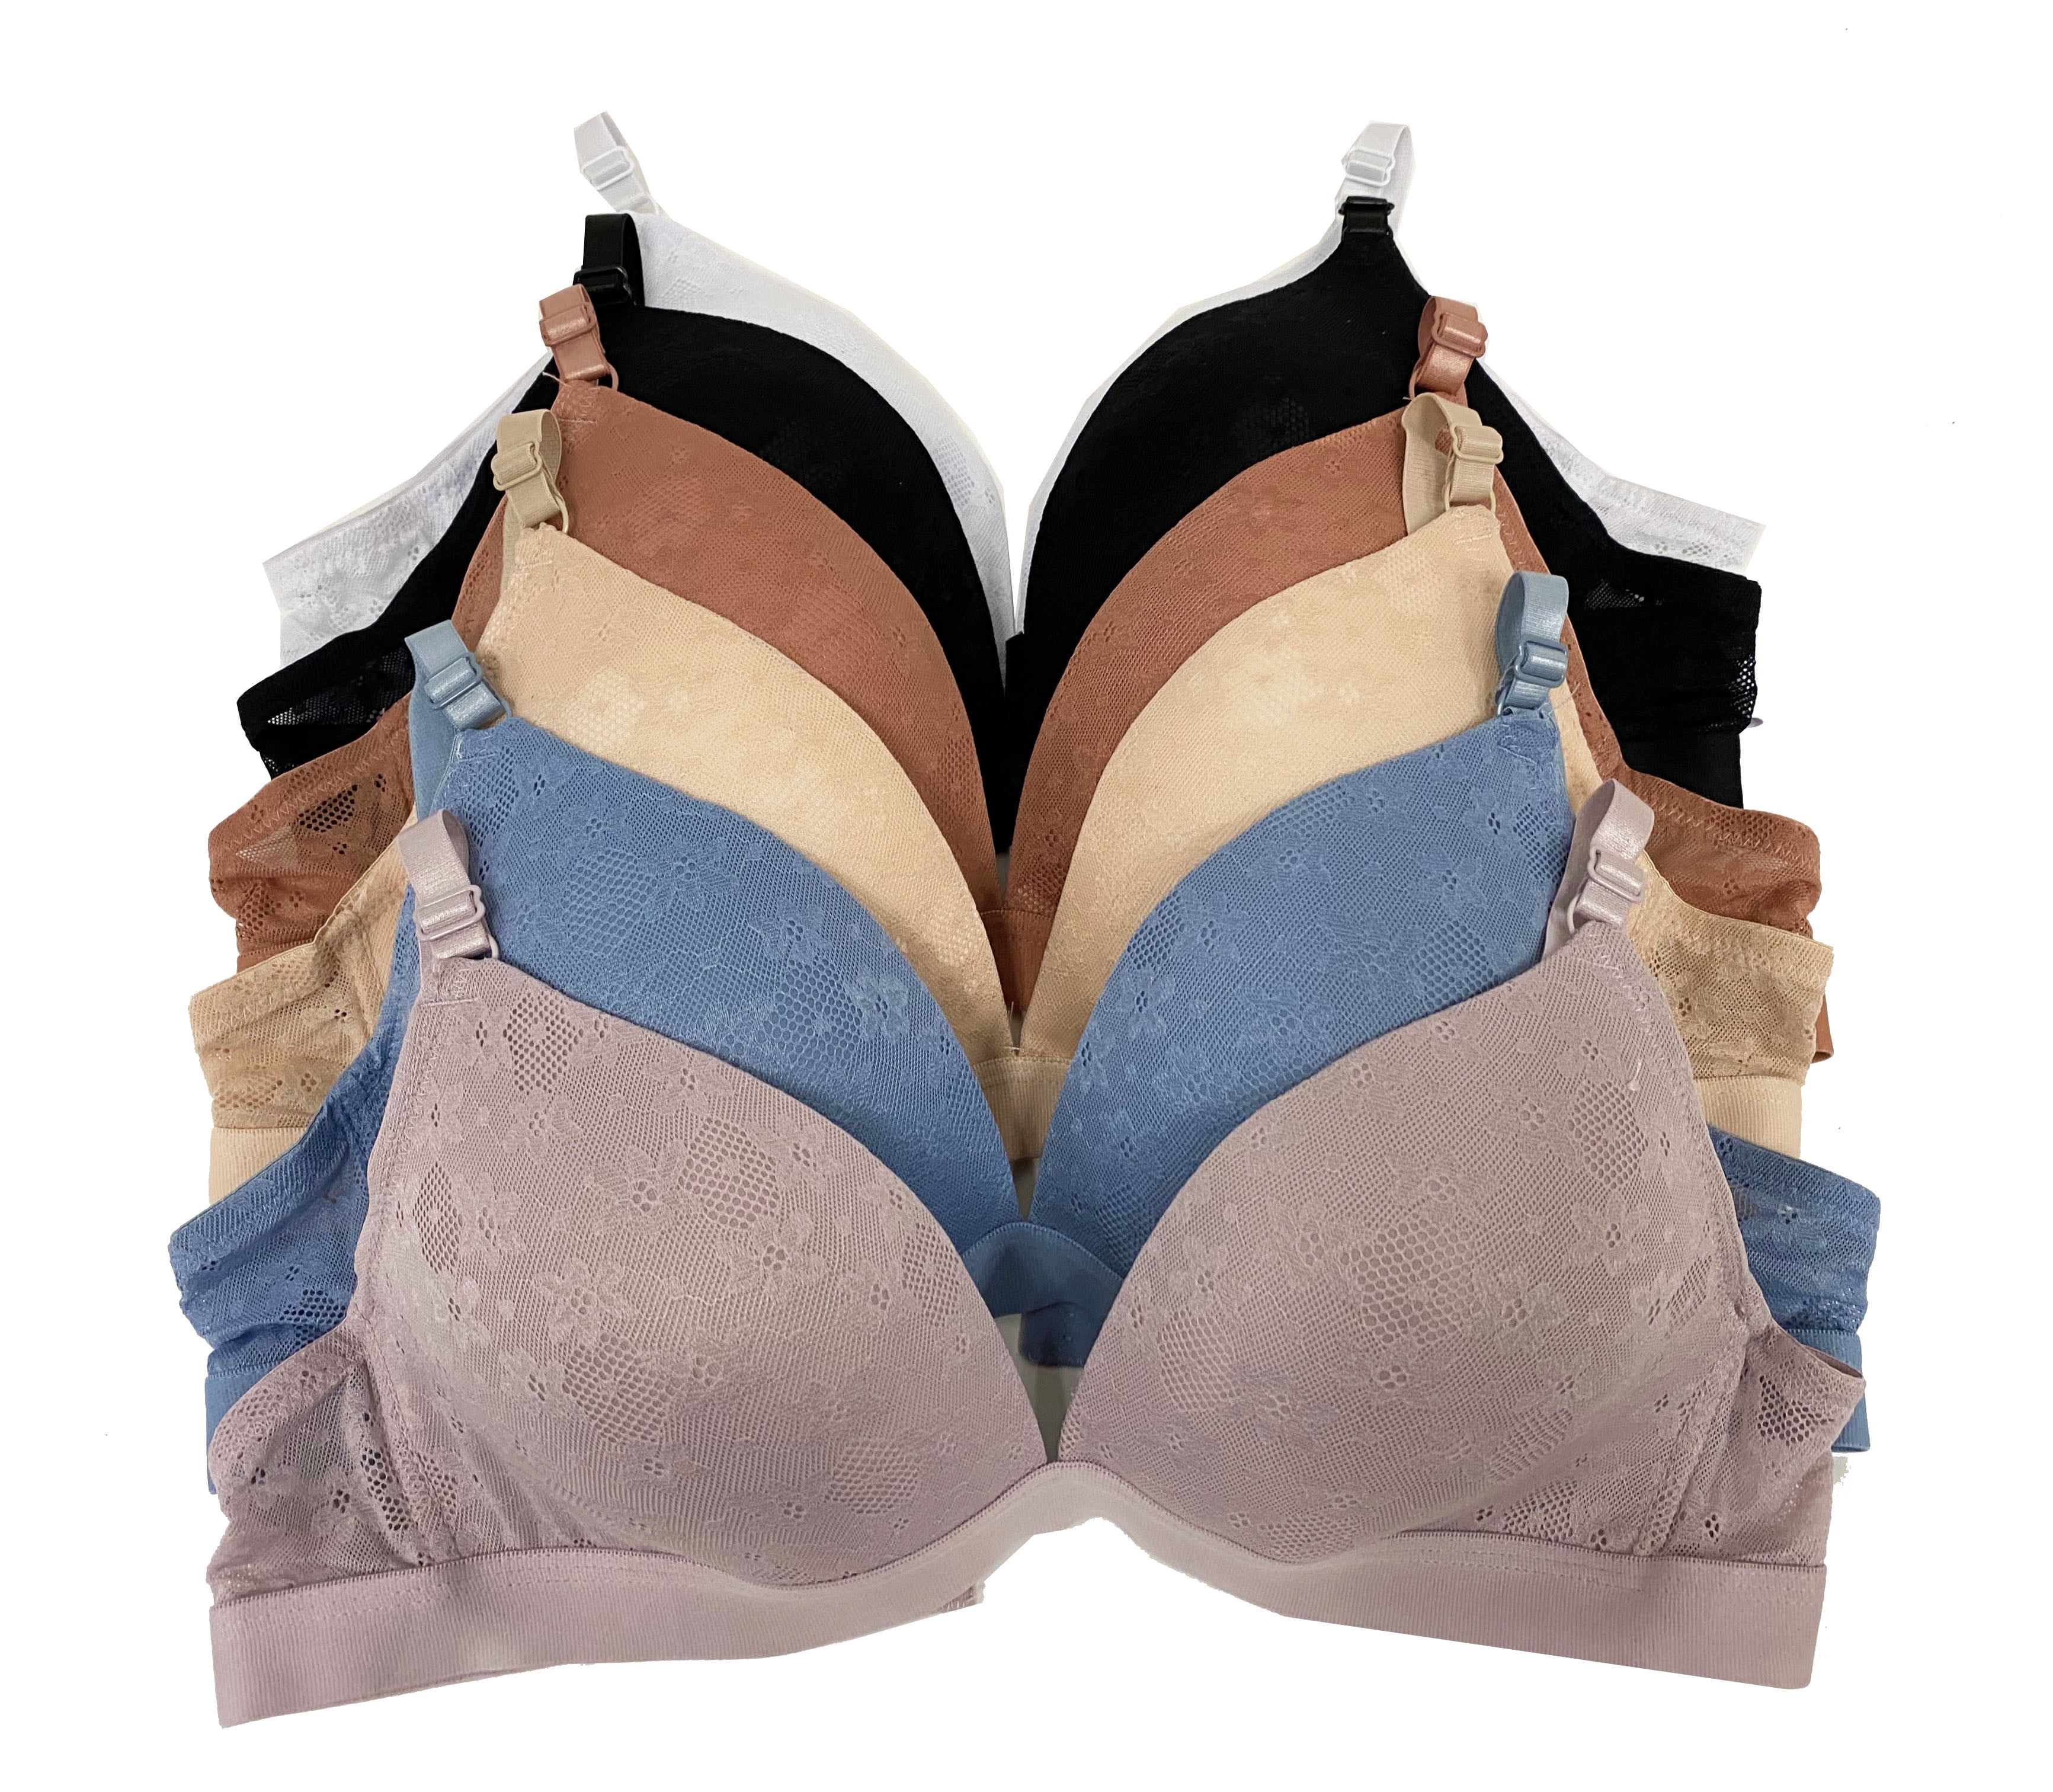 Women Bras 6 pack of Basic No Wire Free Wireless Bra B cup C cup Size 40C  (S6319)